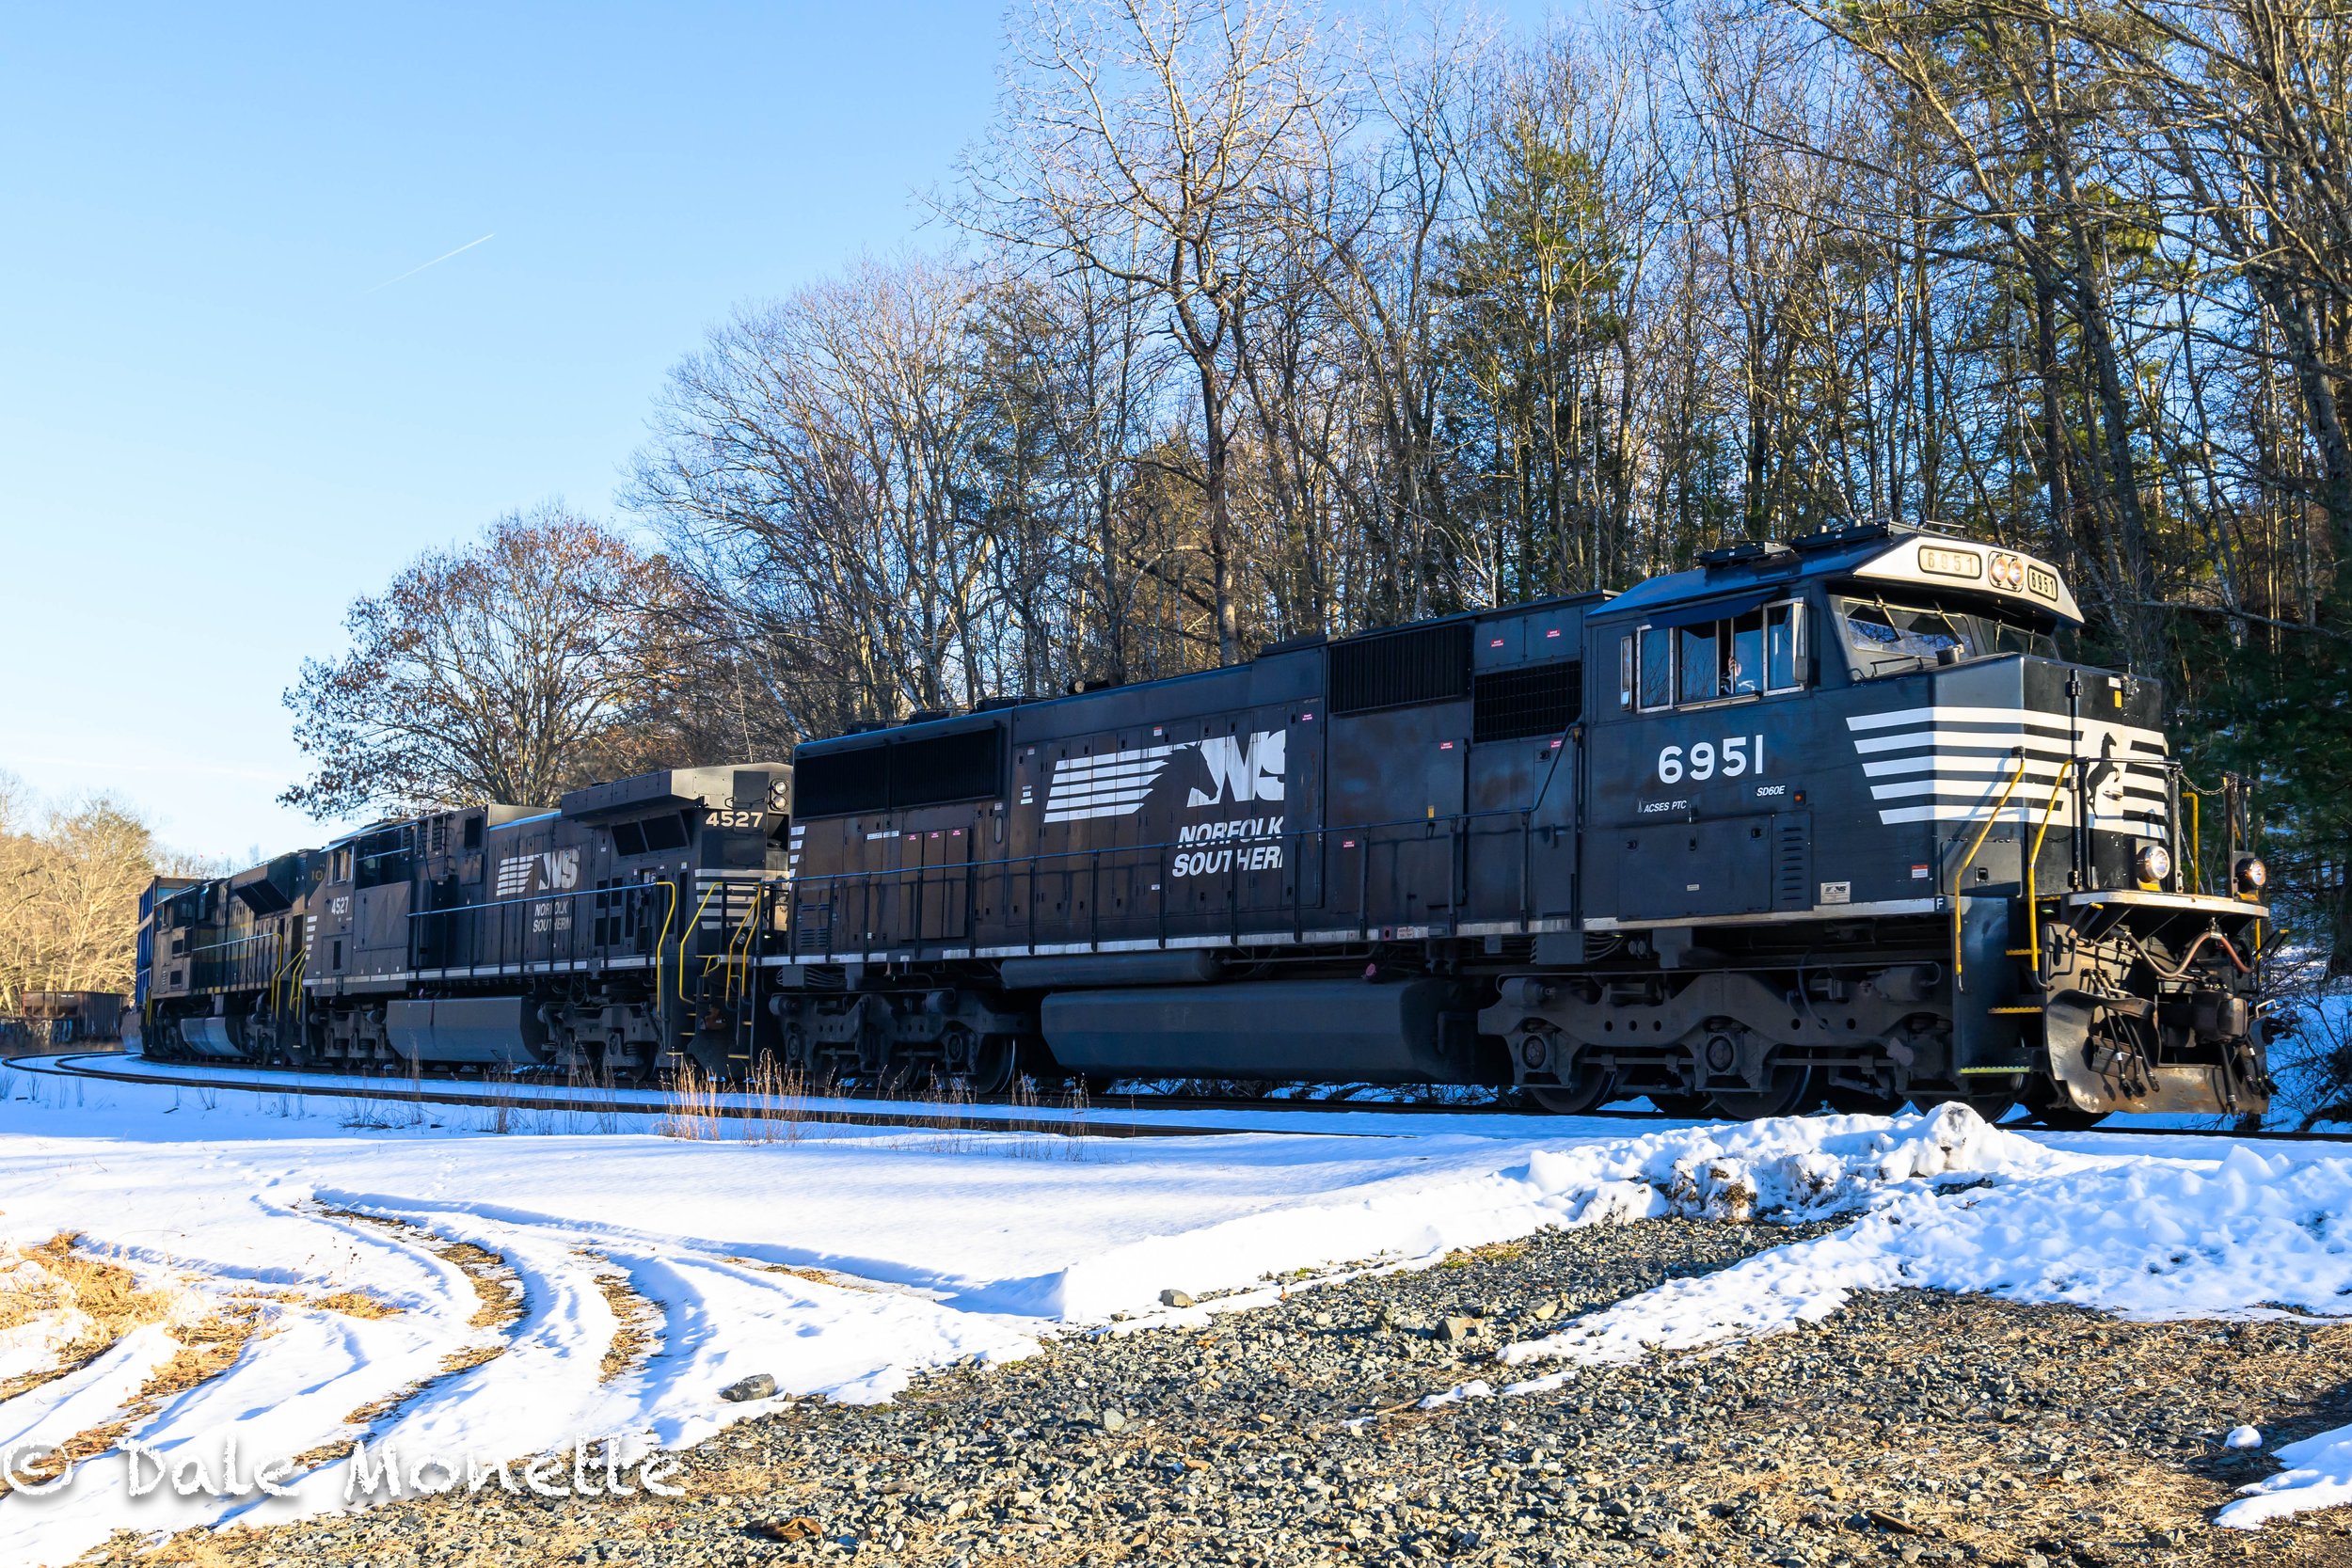   Ive always loved trains. When it’s tough to get into the woods I can always find trains.  This is Norfolk Southern train #B-101. 6500 feet long passing thru Millers Falls, MA on its way to Chicago from Ayer, MA.  The late afternoon sun was perfect!